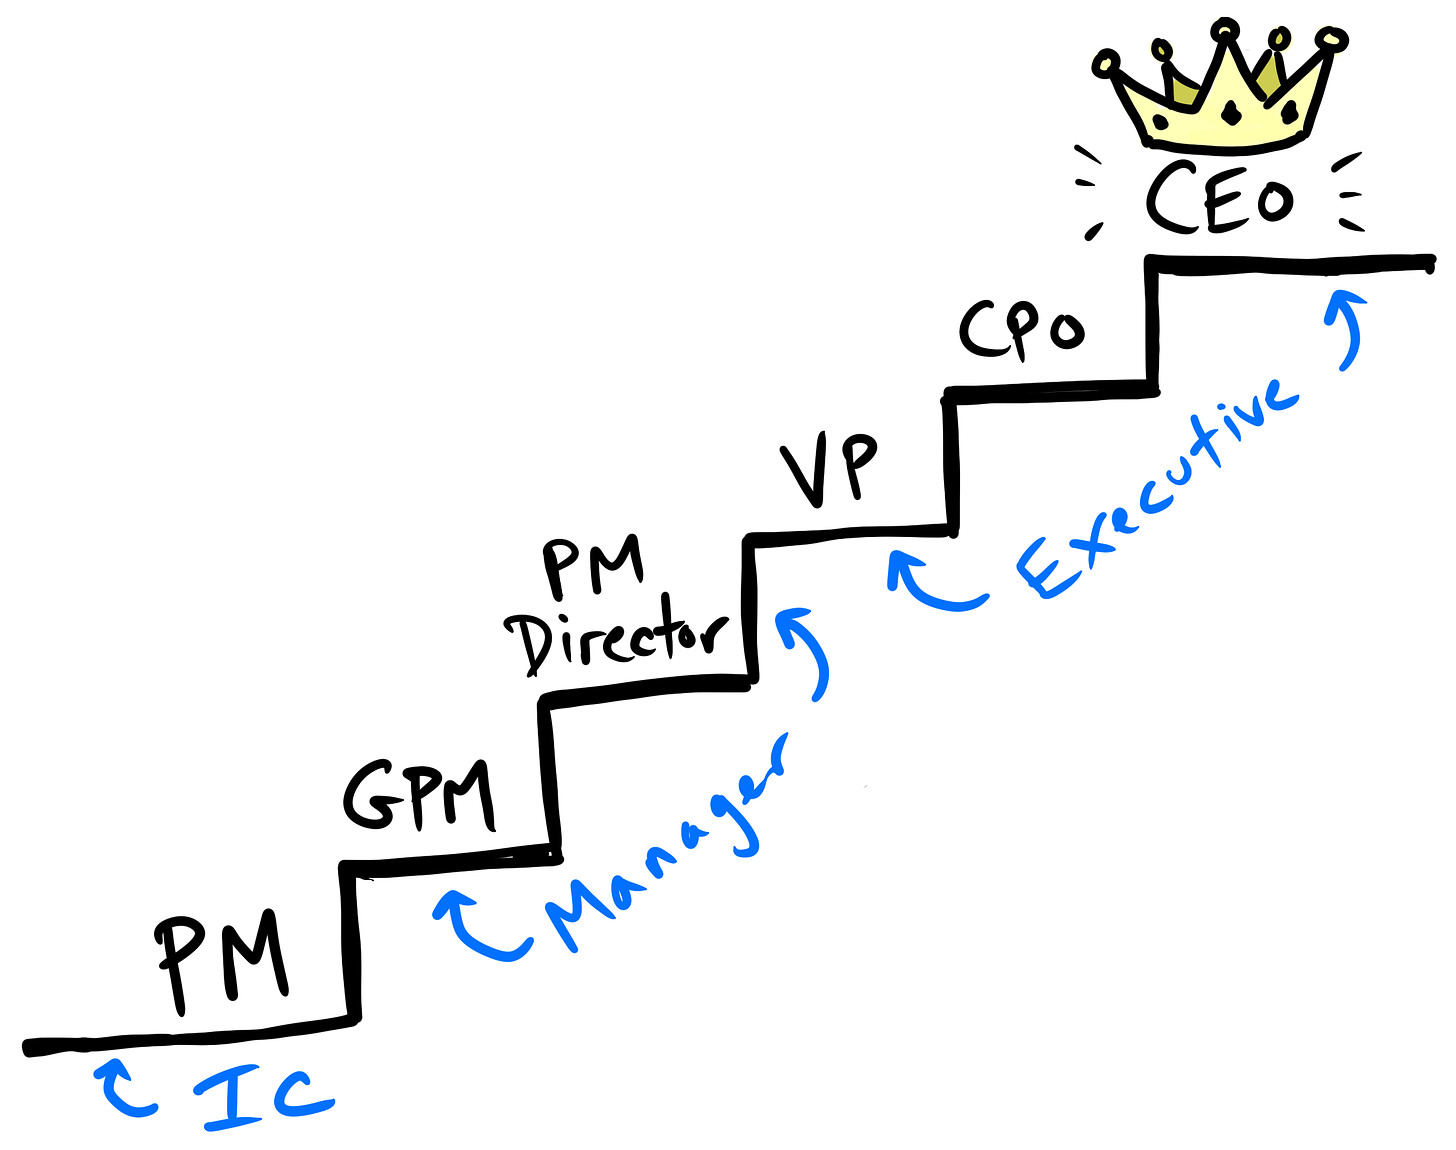 Typical product manager career path: PM → GPM → PM Director → VP/CPO → CEO/Founder